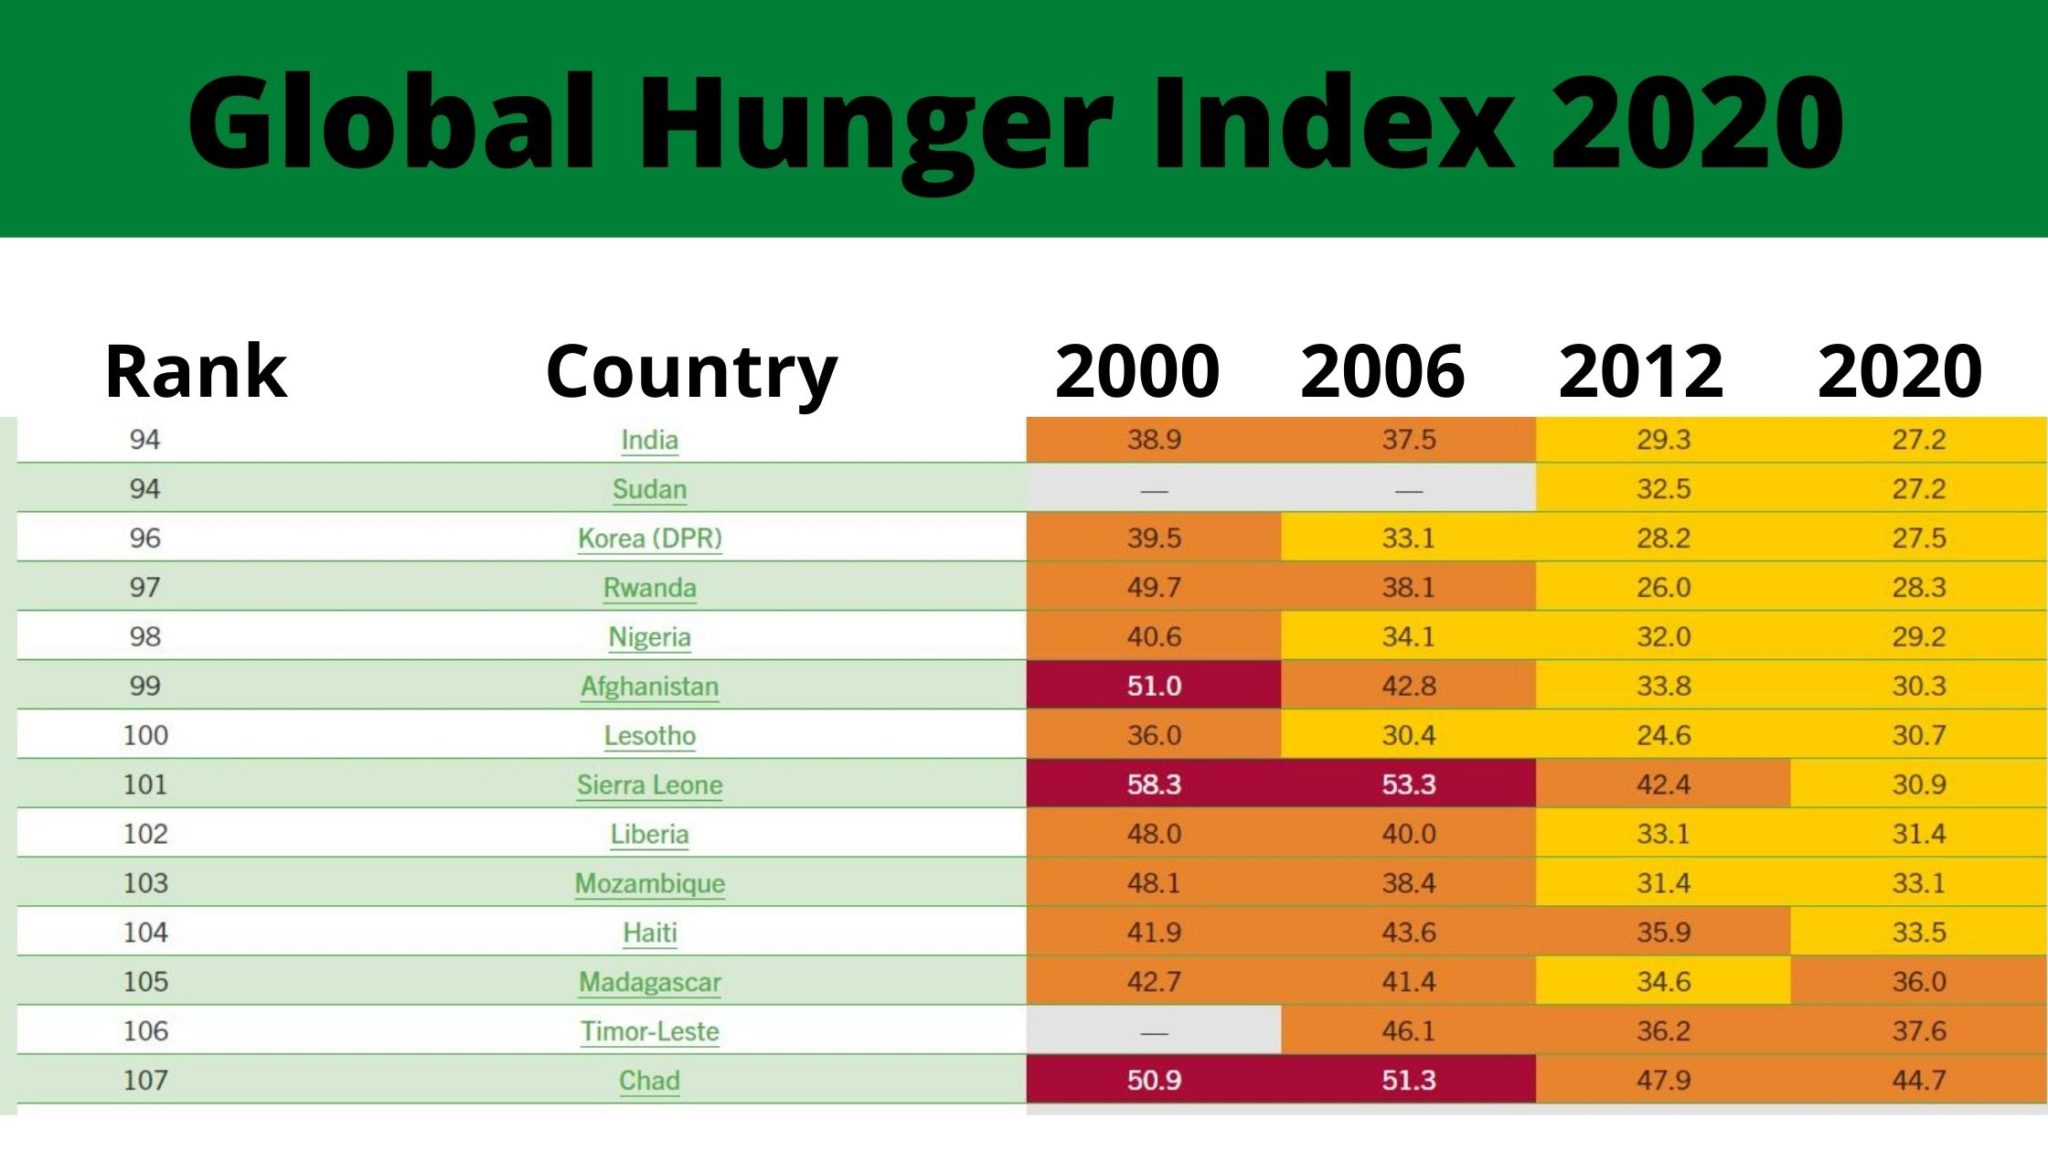 Global Hunger Index 4 Worst Affected Countries? What Strategies To